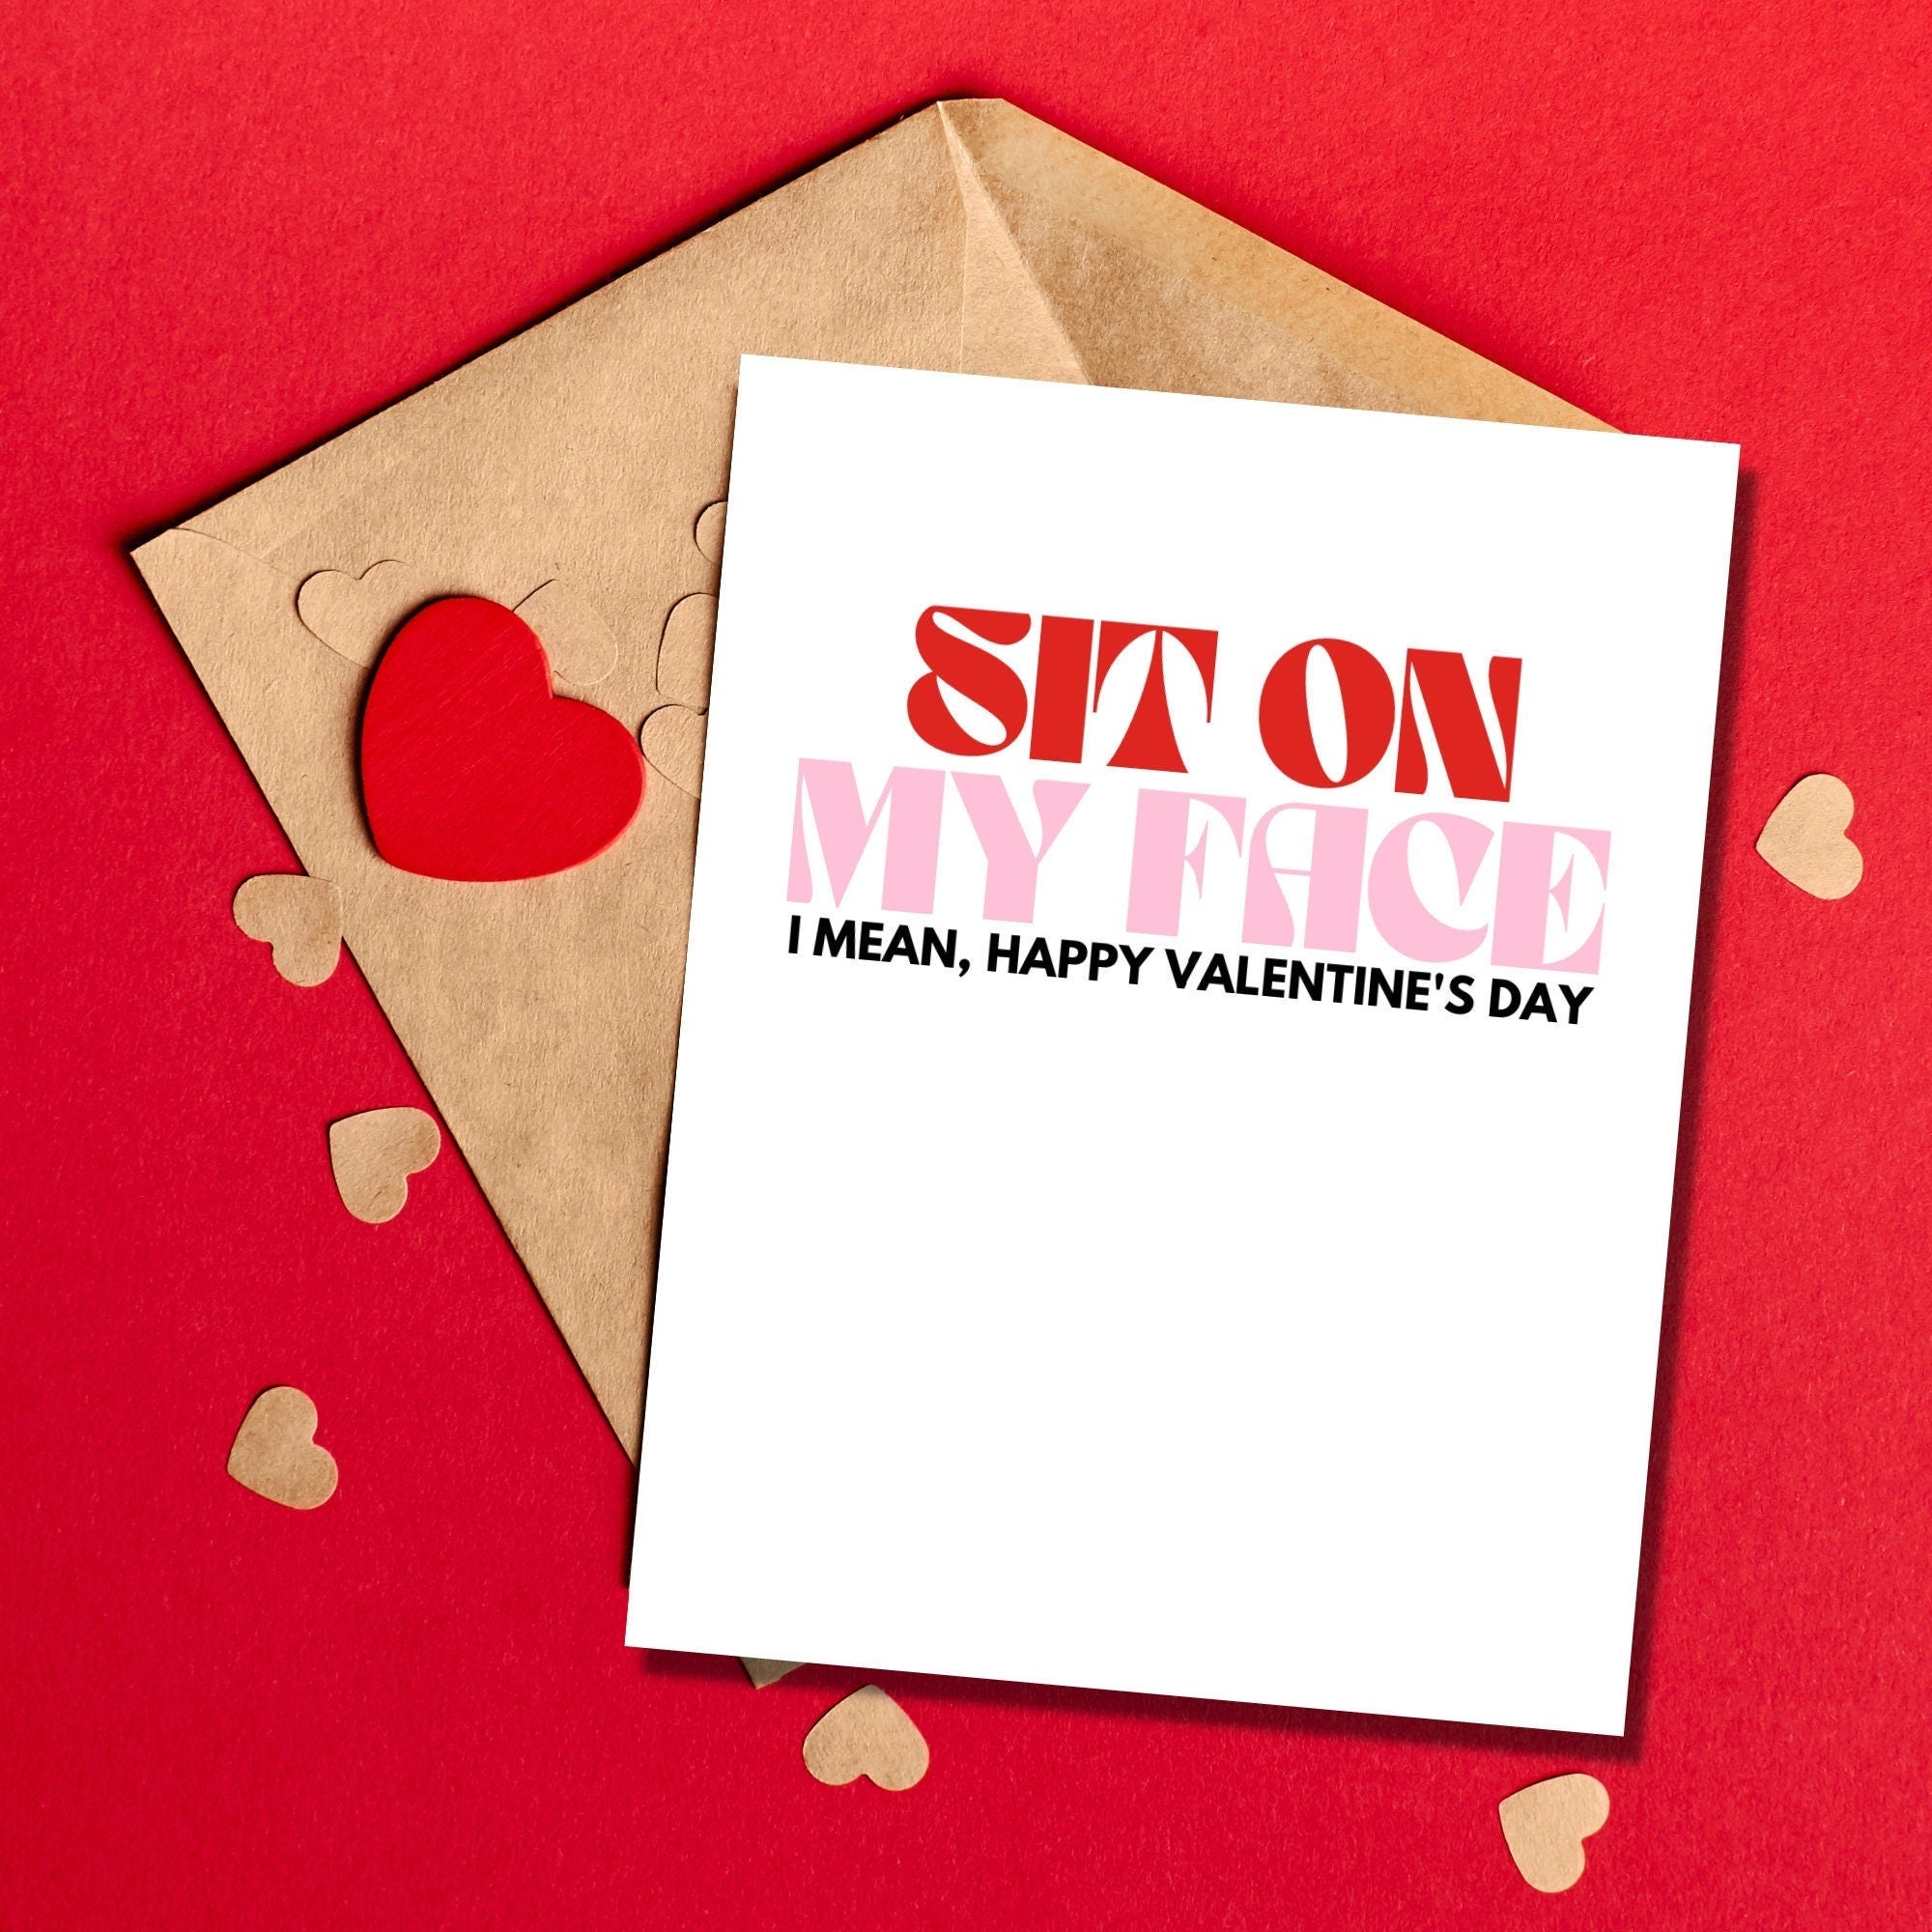 Sit on My Face I Mean, Happy Valentine's Day Card